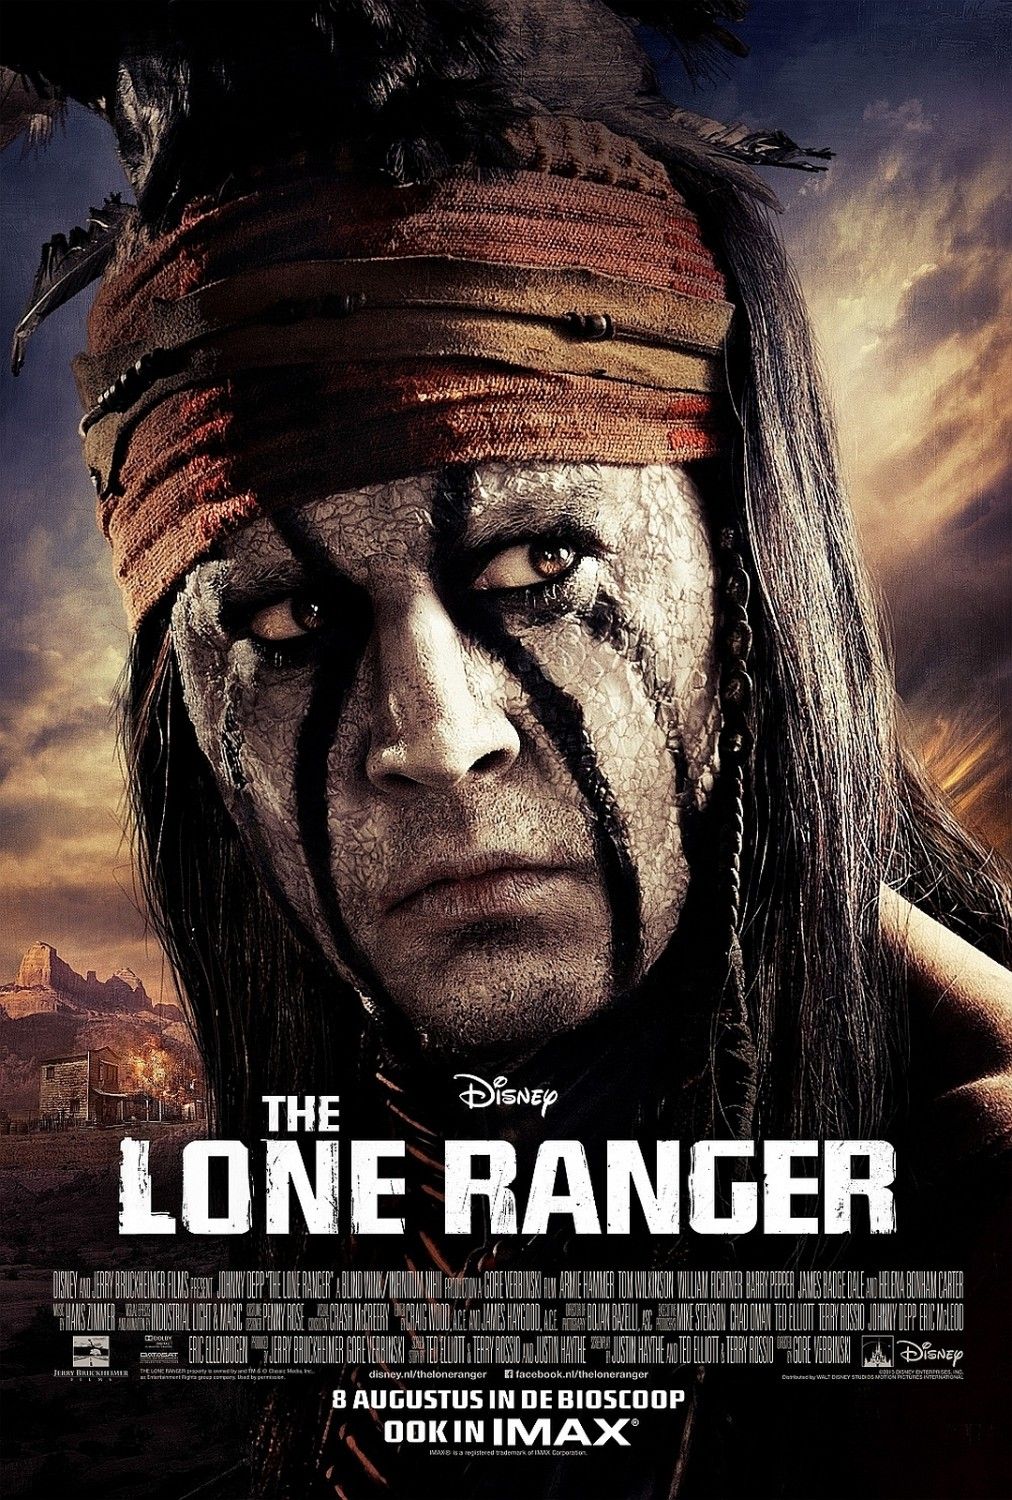 The Lone Ranger Character Poster 2